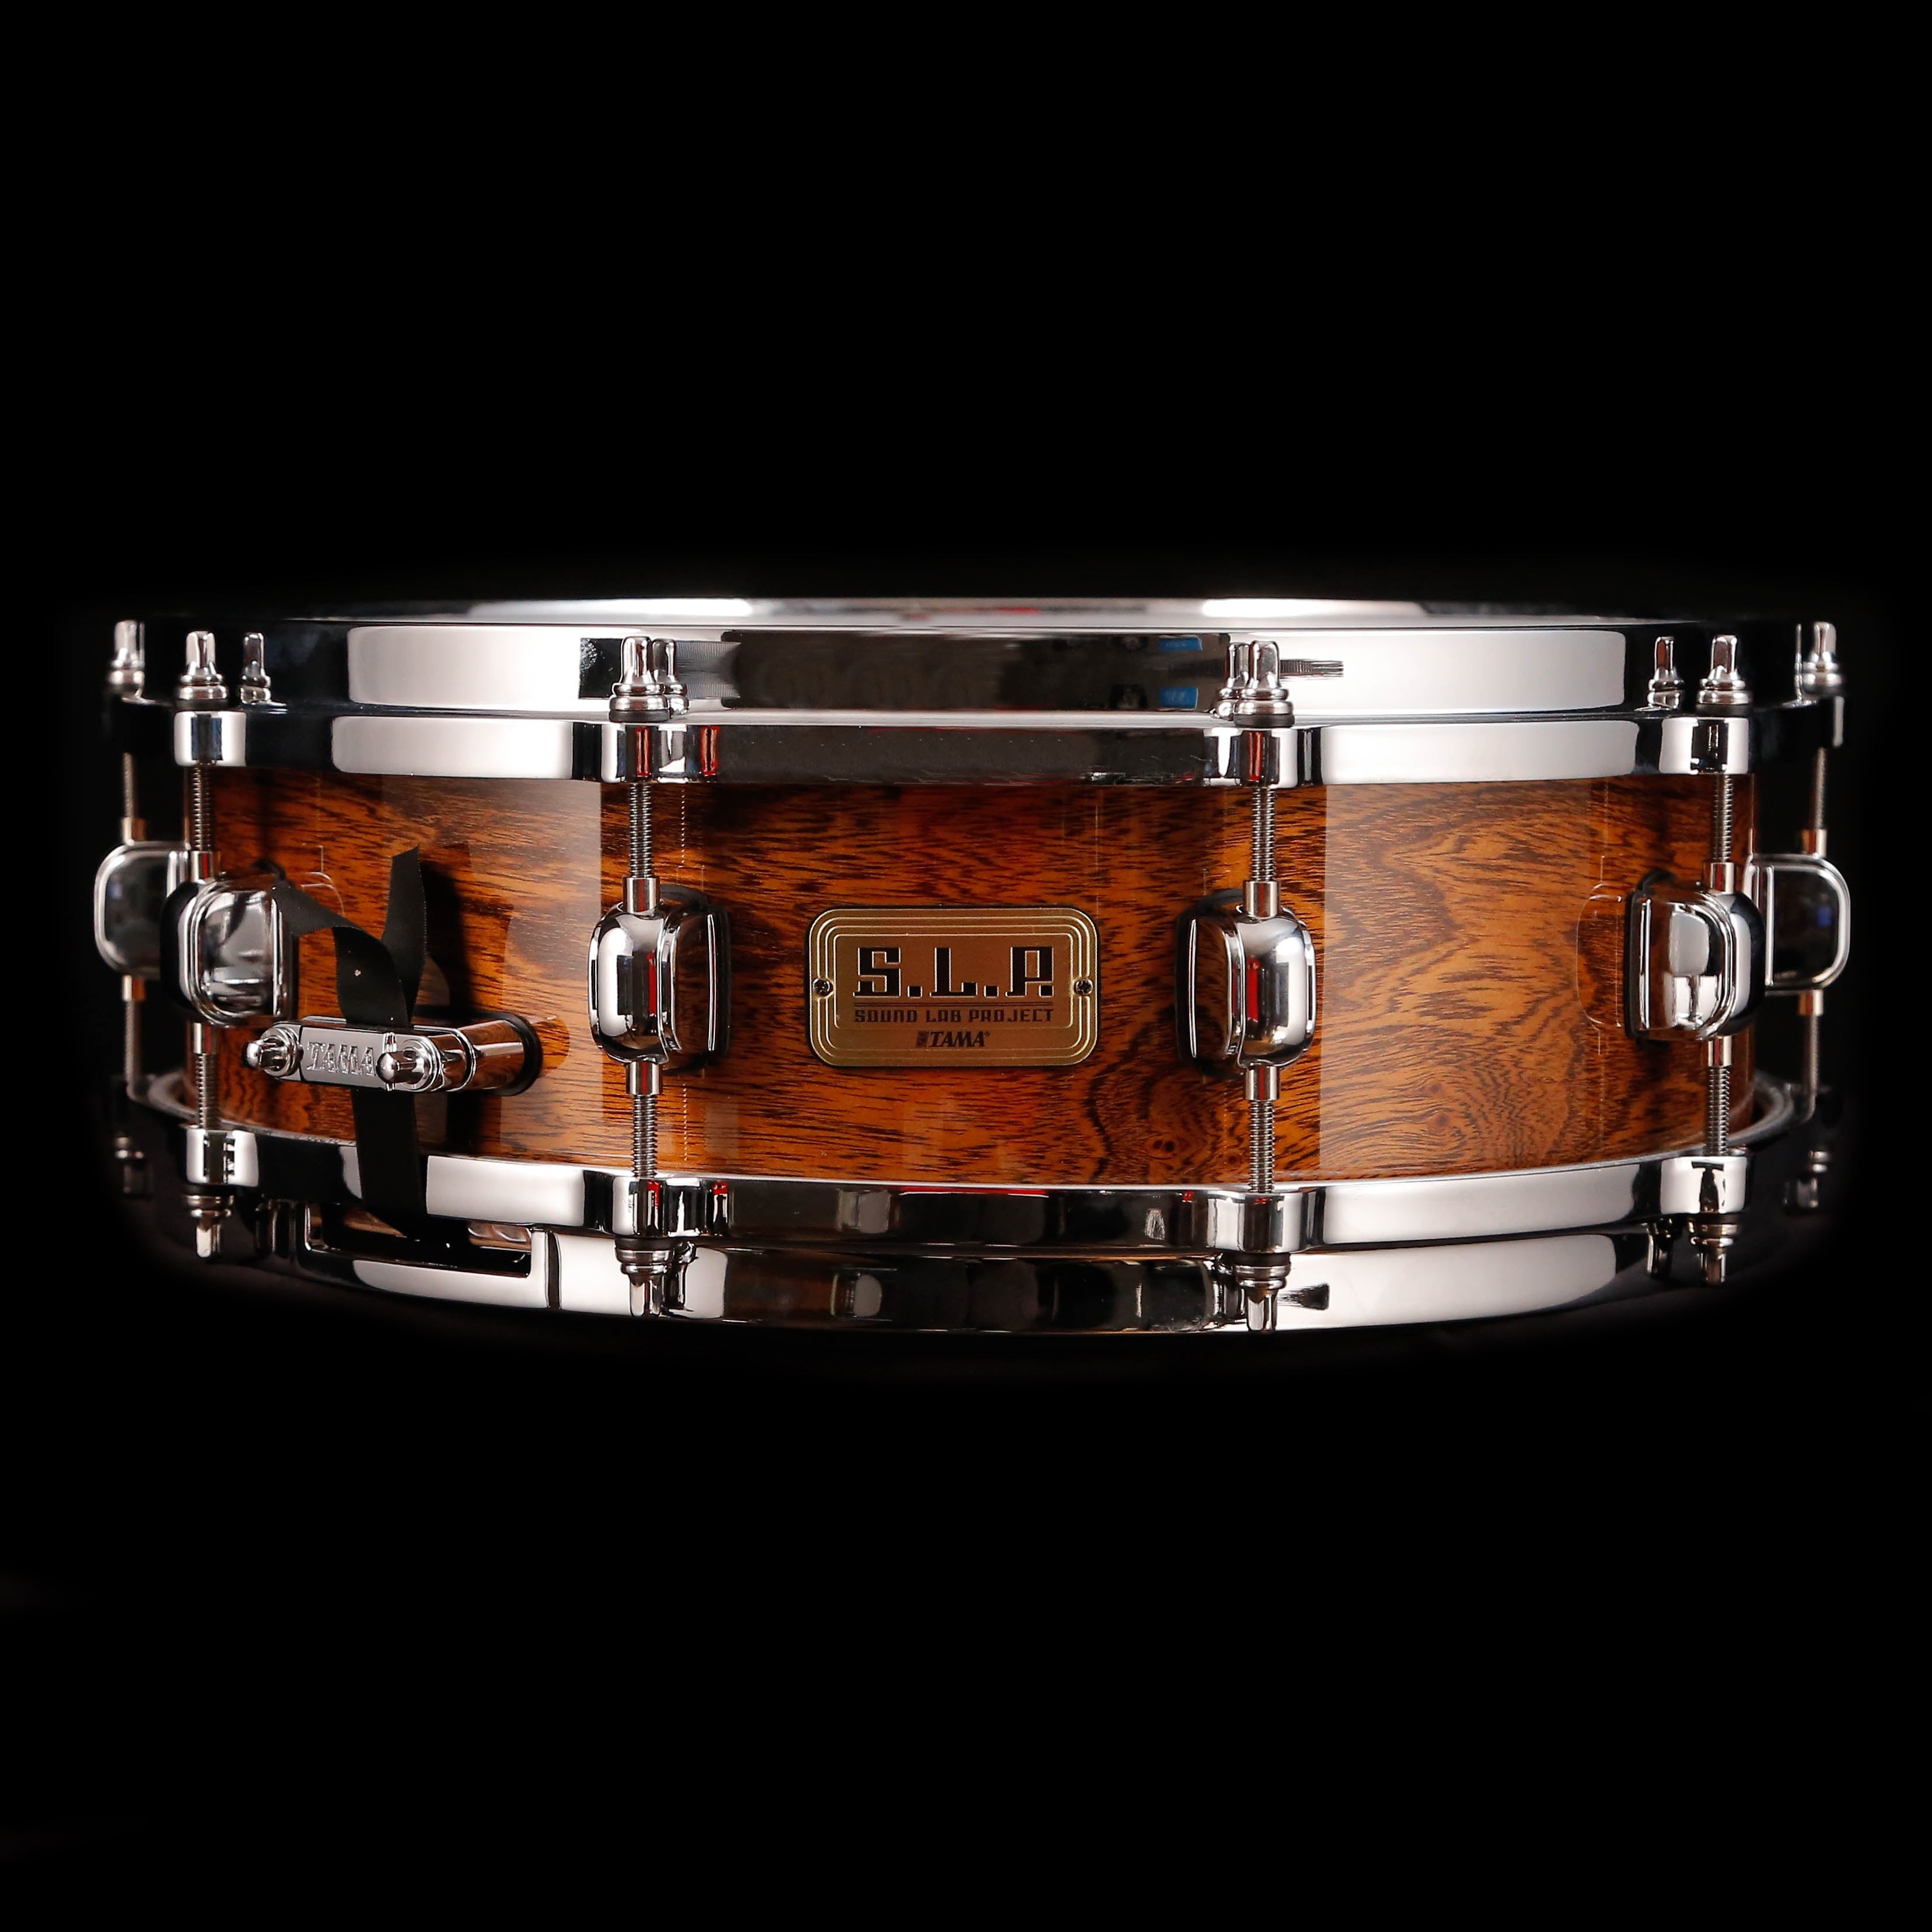 Tama S.L.P. G-Hickory Snare Drum - 4.5 x 14 inch - Gloss Natural Elm